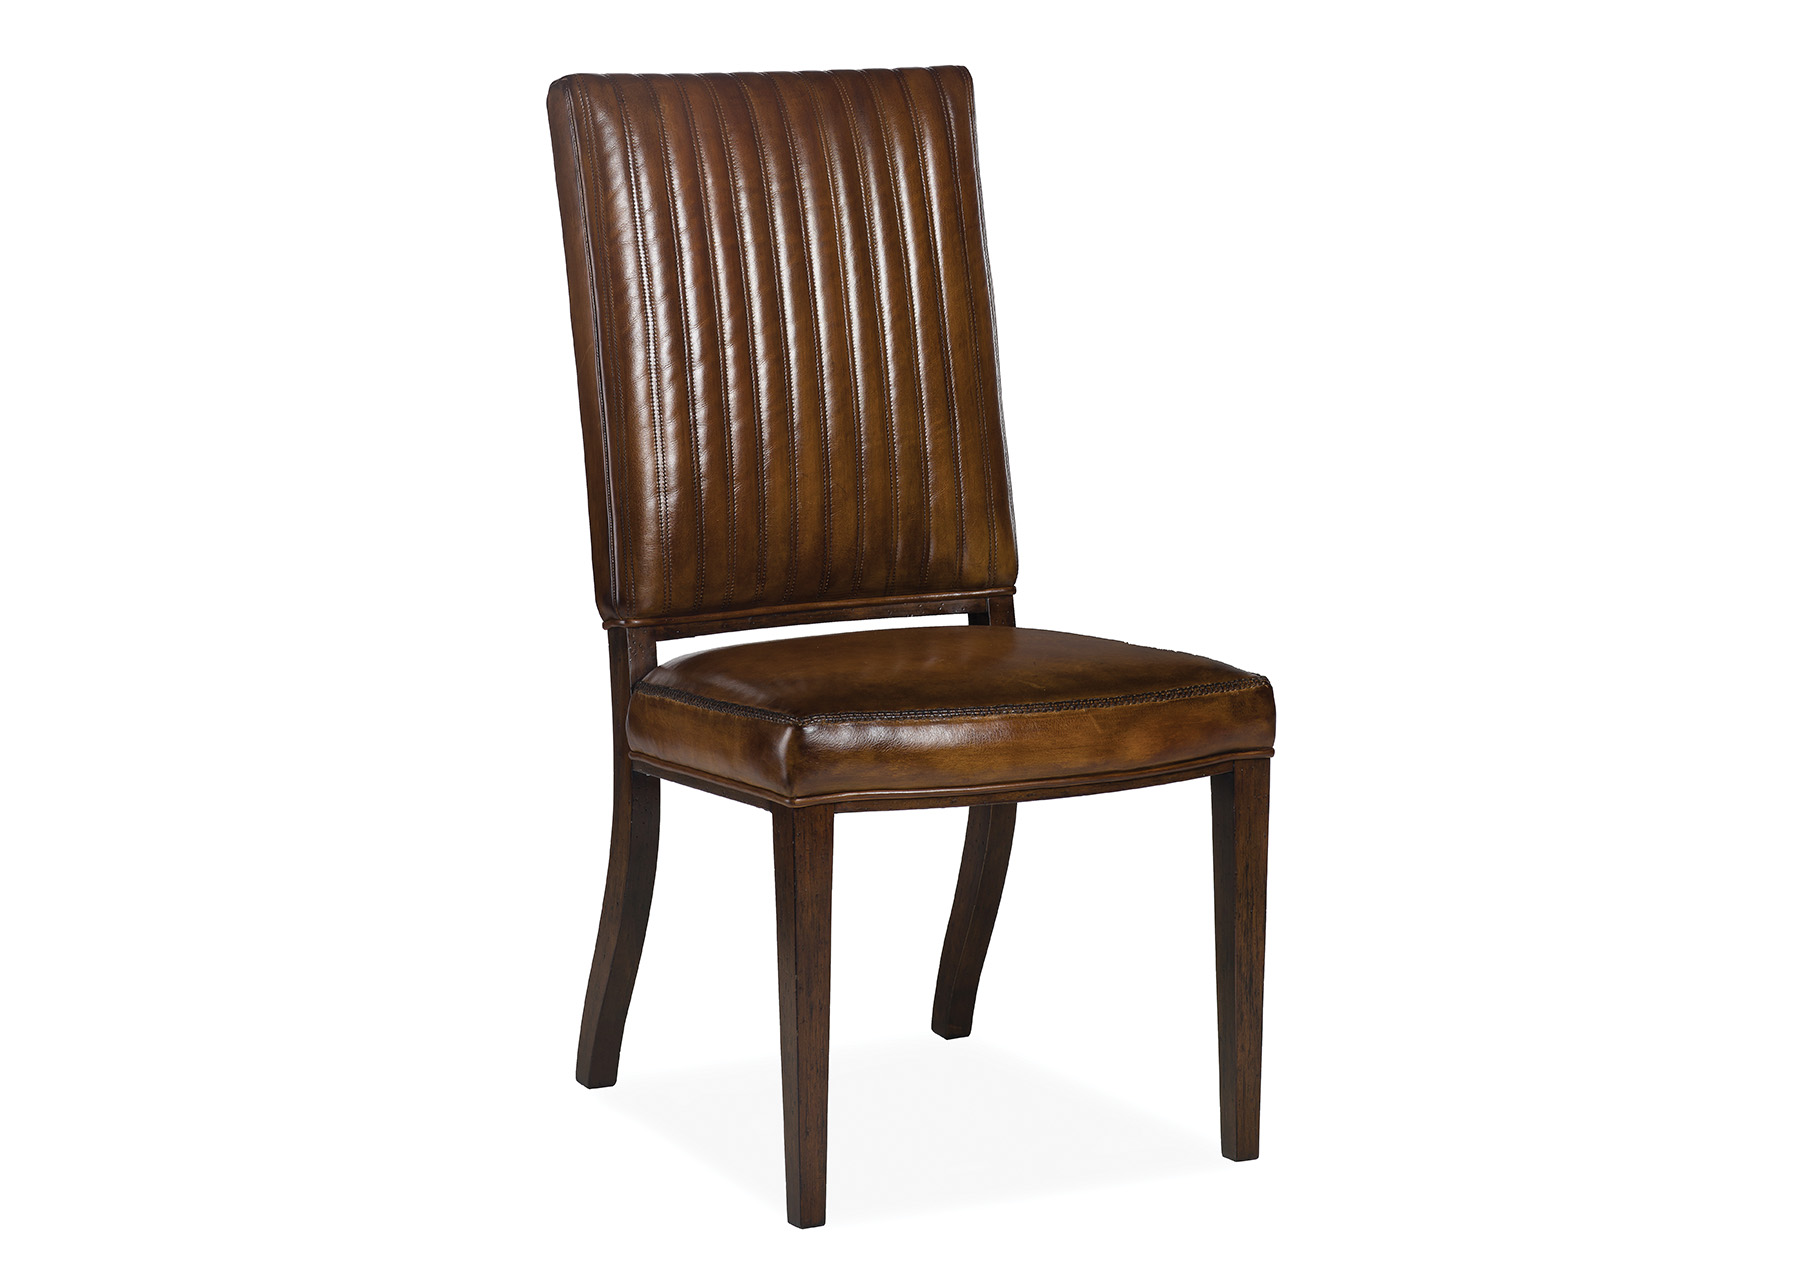 DAVENPORT CHANNEL QUILTED DINING SIDE CHAIR